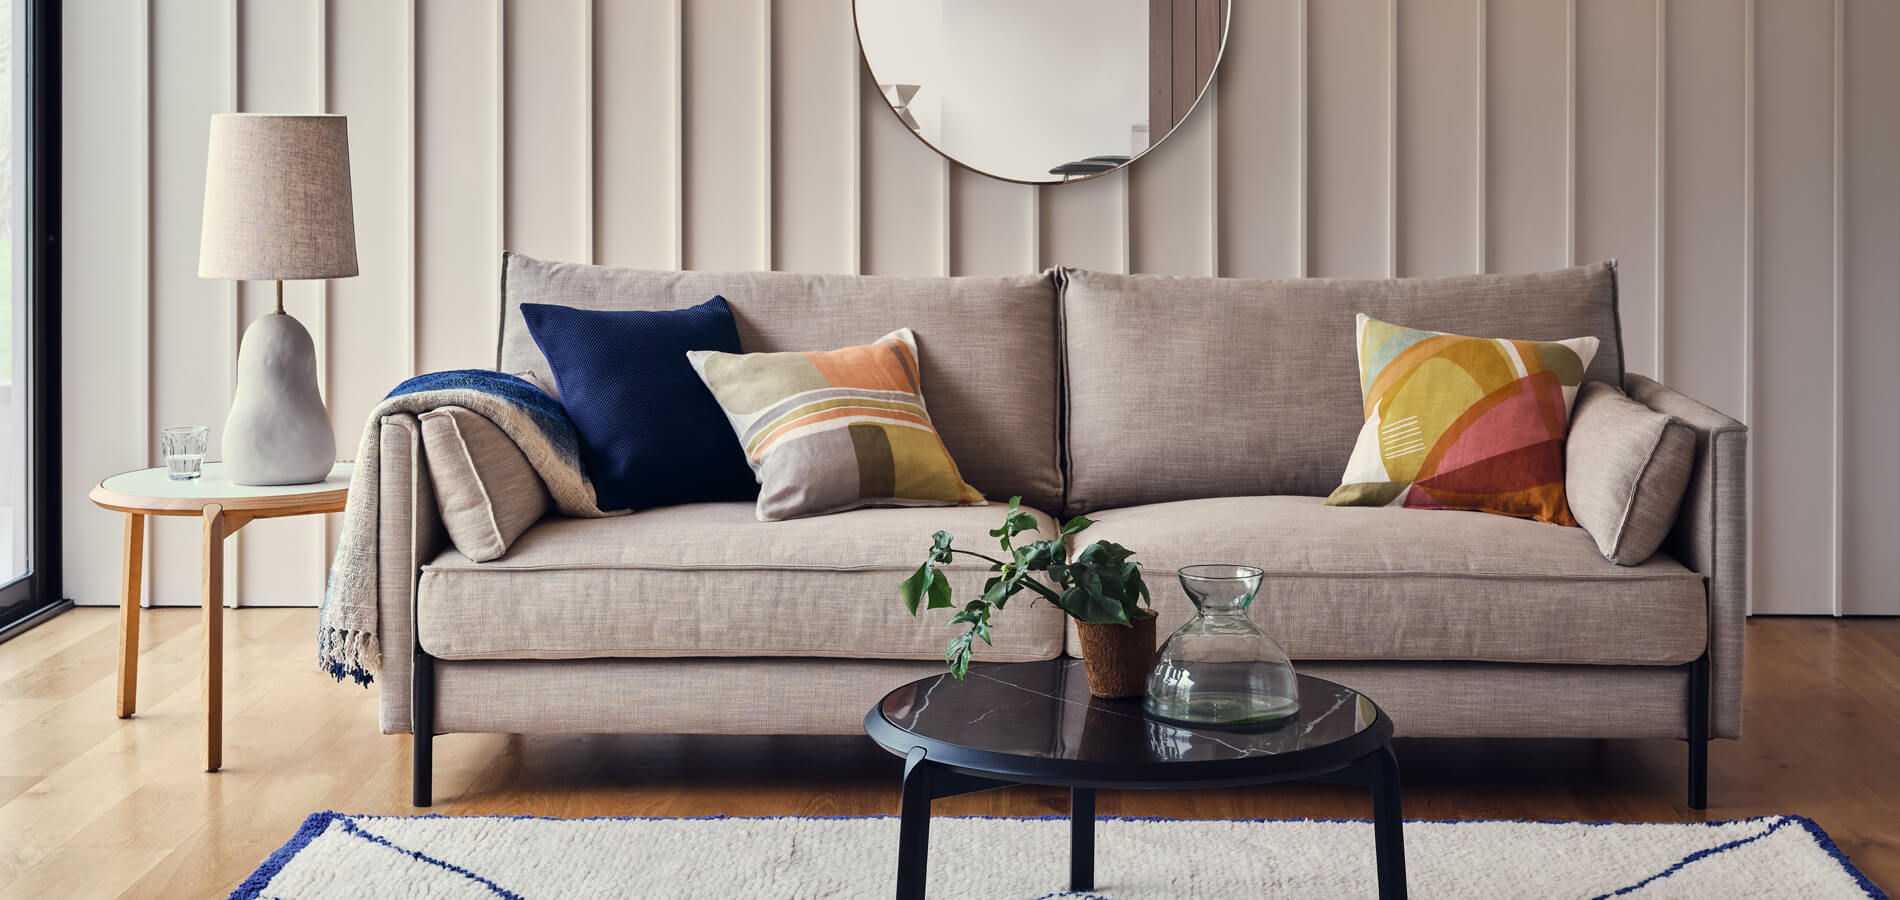 How to Find the Right Throw Pillow for Your Sofa